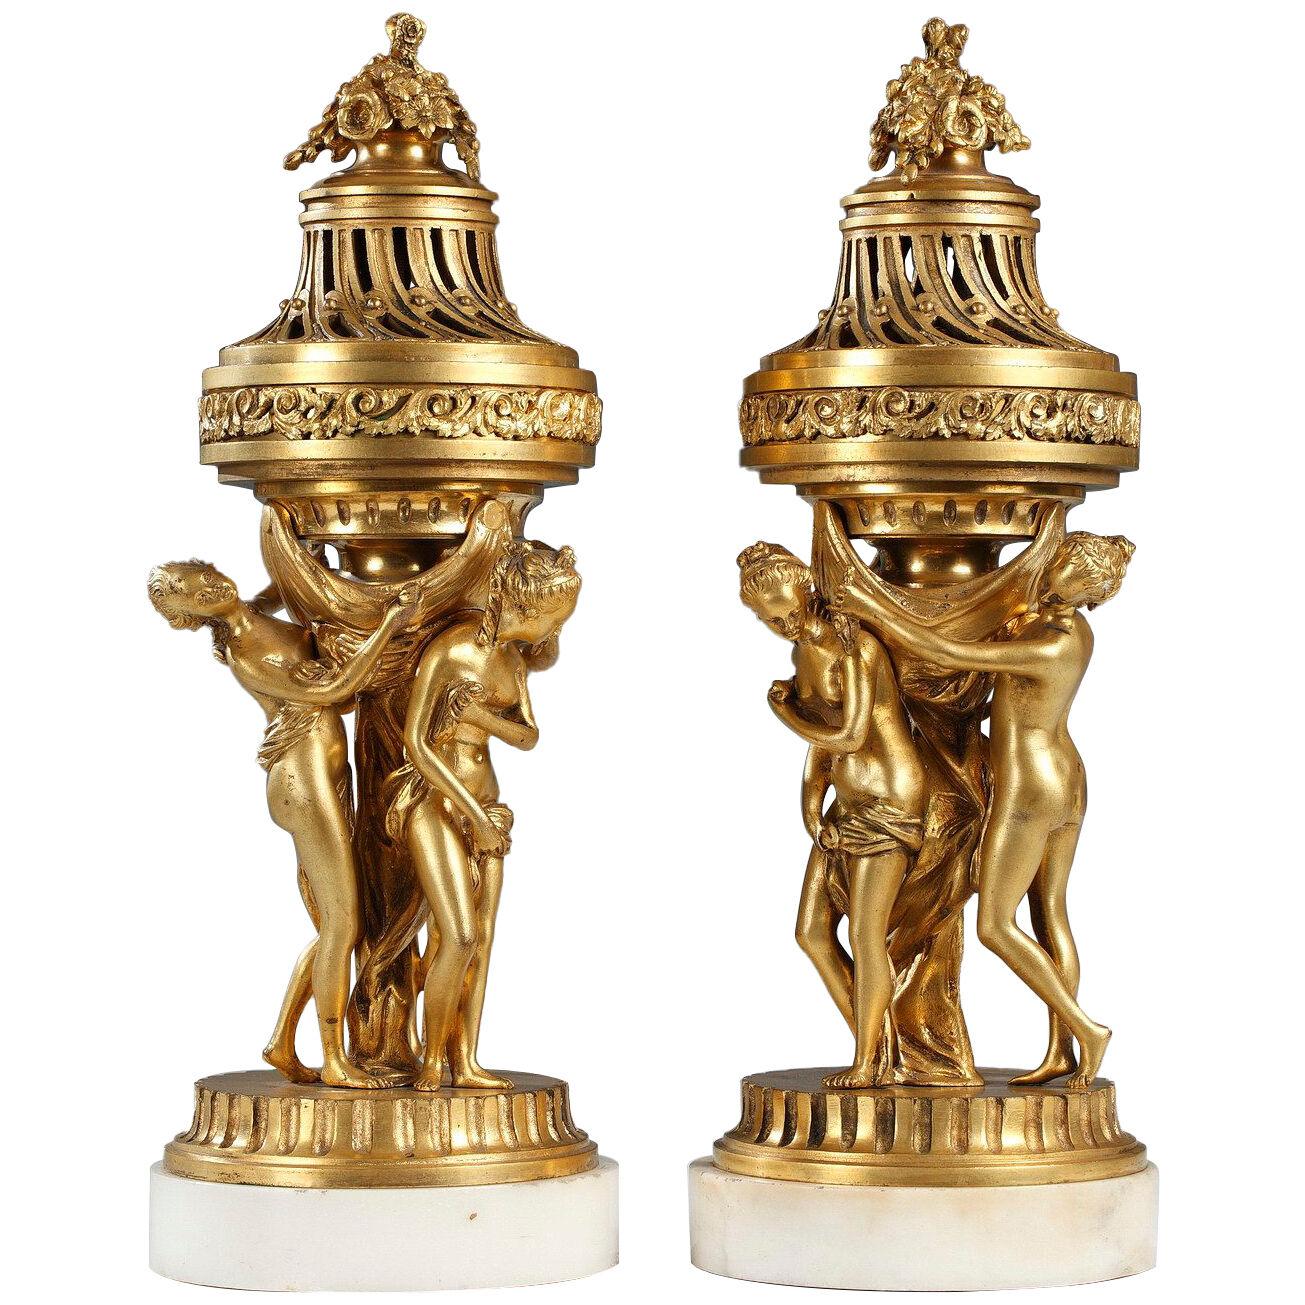 Pair of Gilded Bronze & Marble Perfume Burners After E-M Falconet, France, c1880